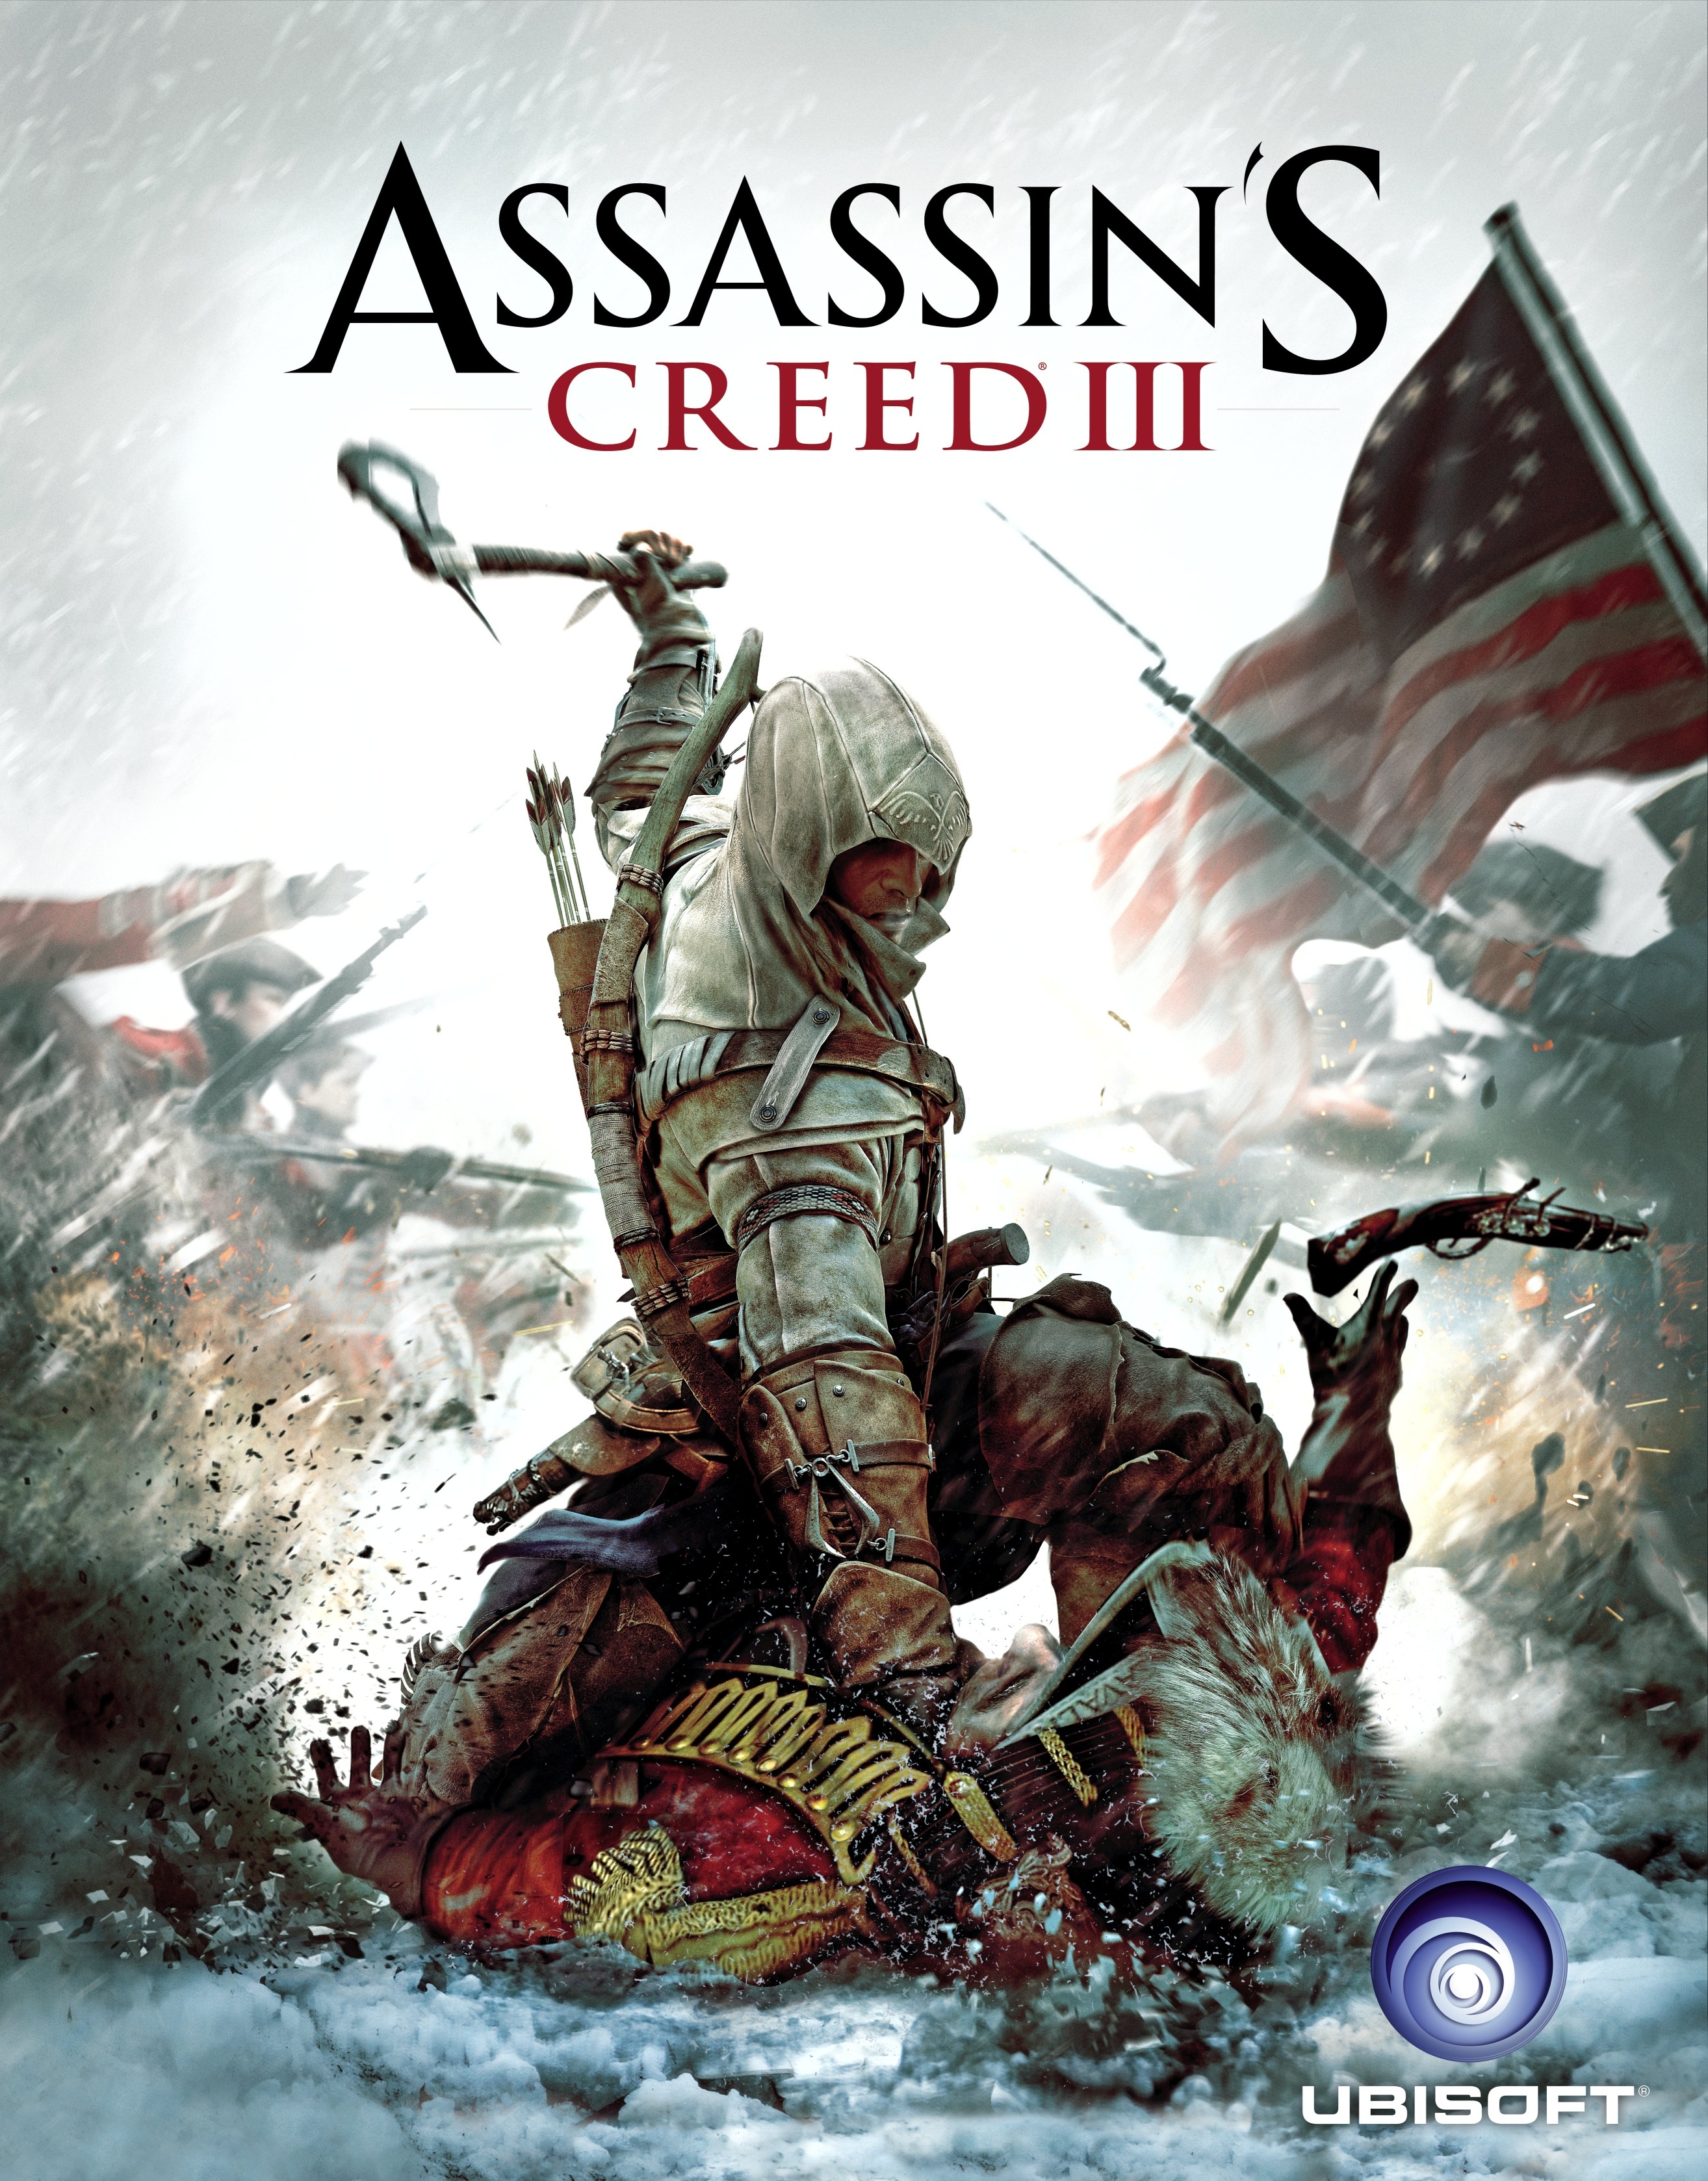 assassin's creed 3 ps4 price